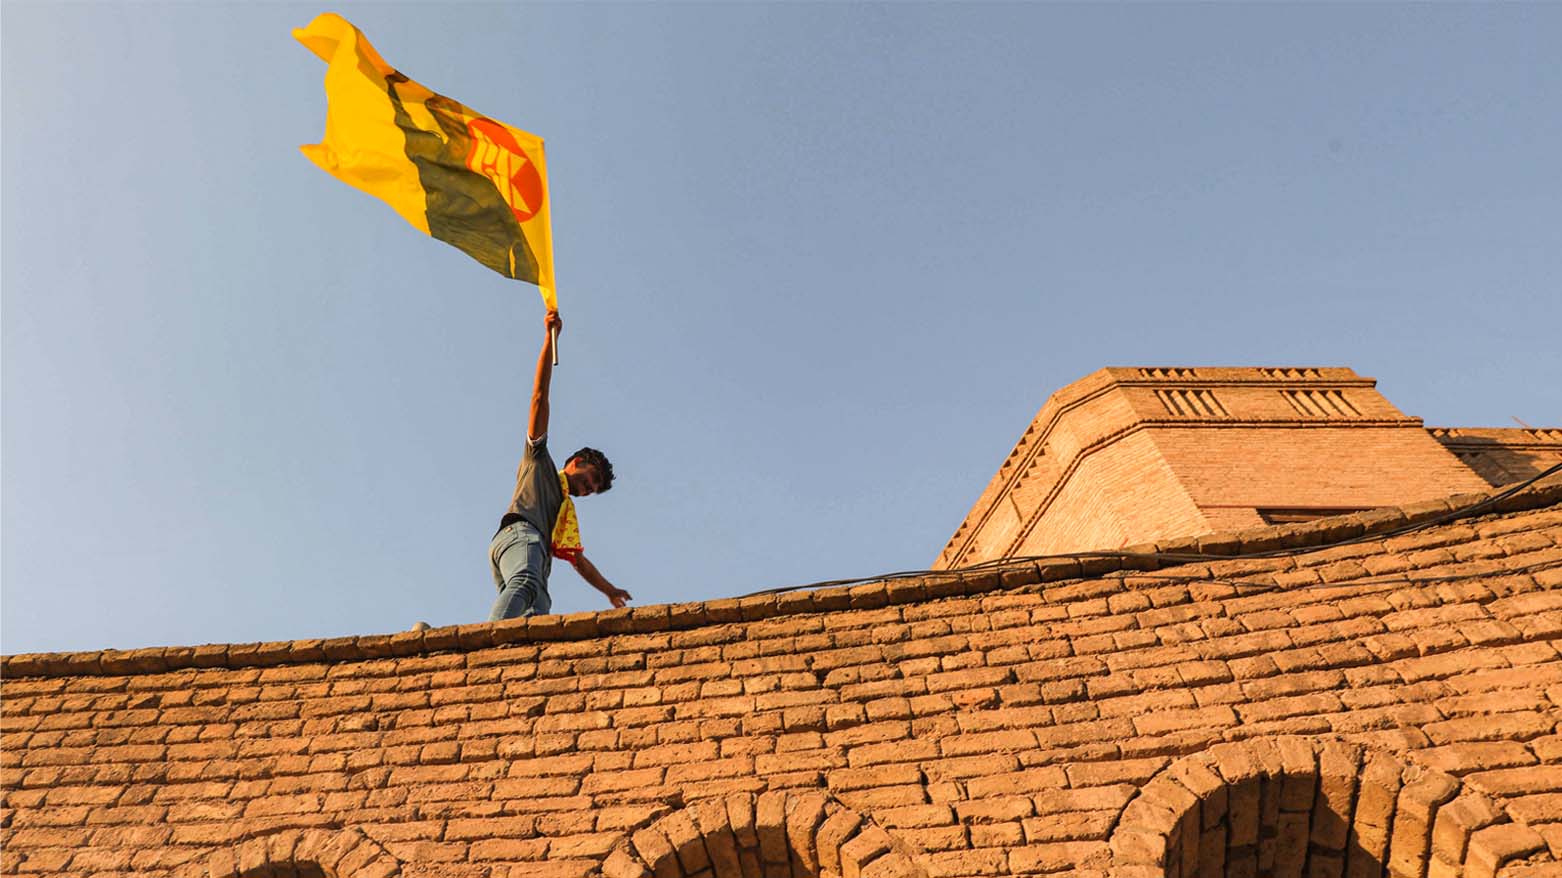 A KDP supporter wave his party's flag at ancient Erbil citadel in Kurdistan Region's capital during an election rally, Oct. 7, 2021. (Photo: Safin Hamed/AFP)